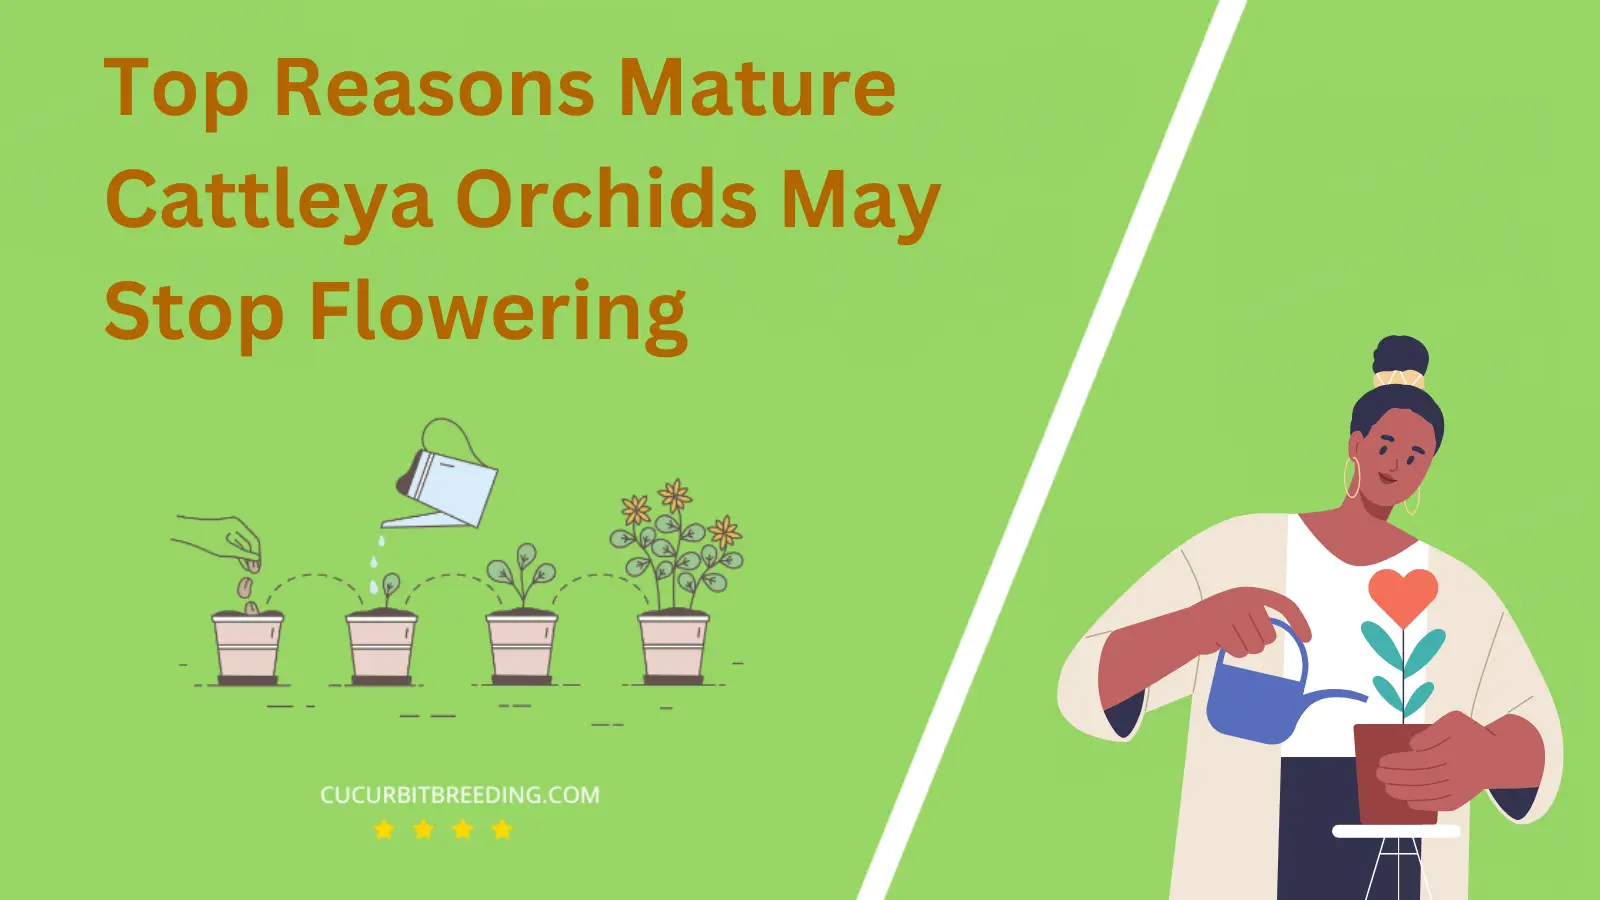 Top Reasons Mature Cattleya Orchids May Stop Flowering